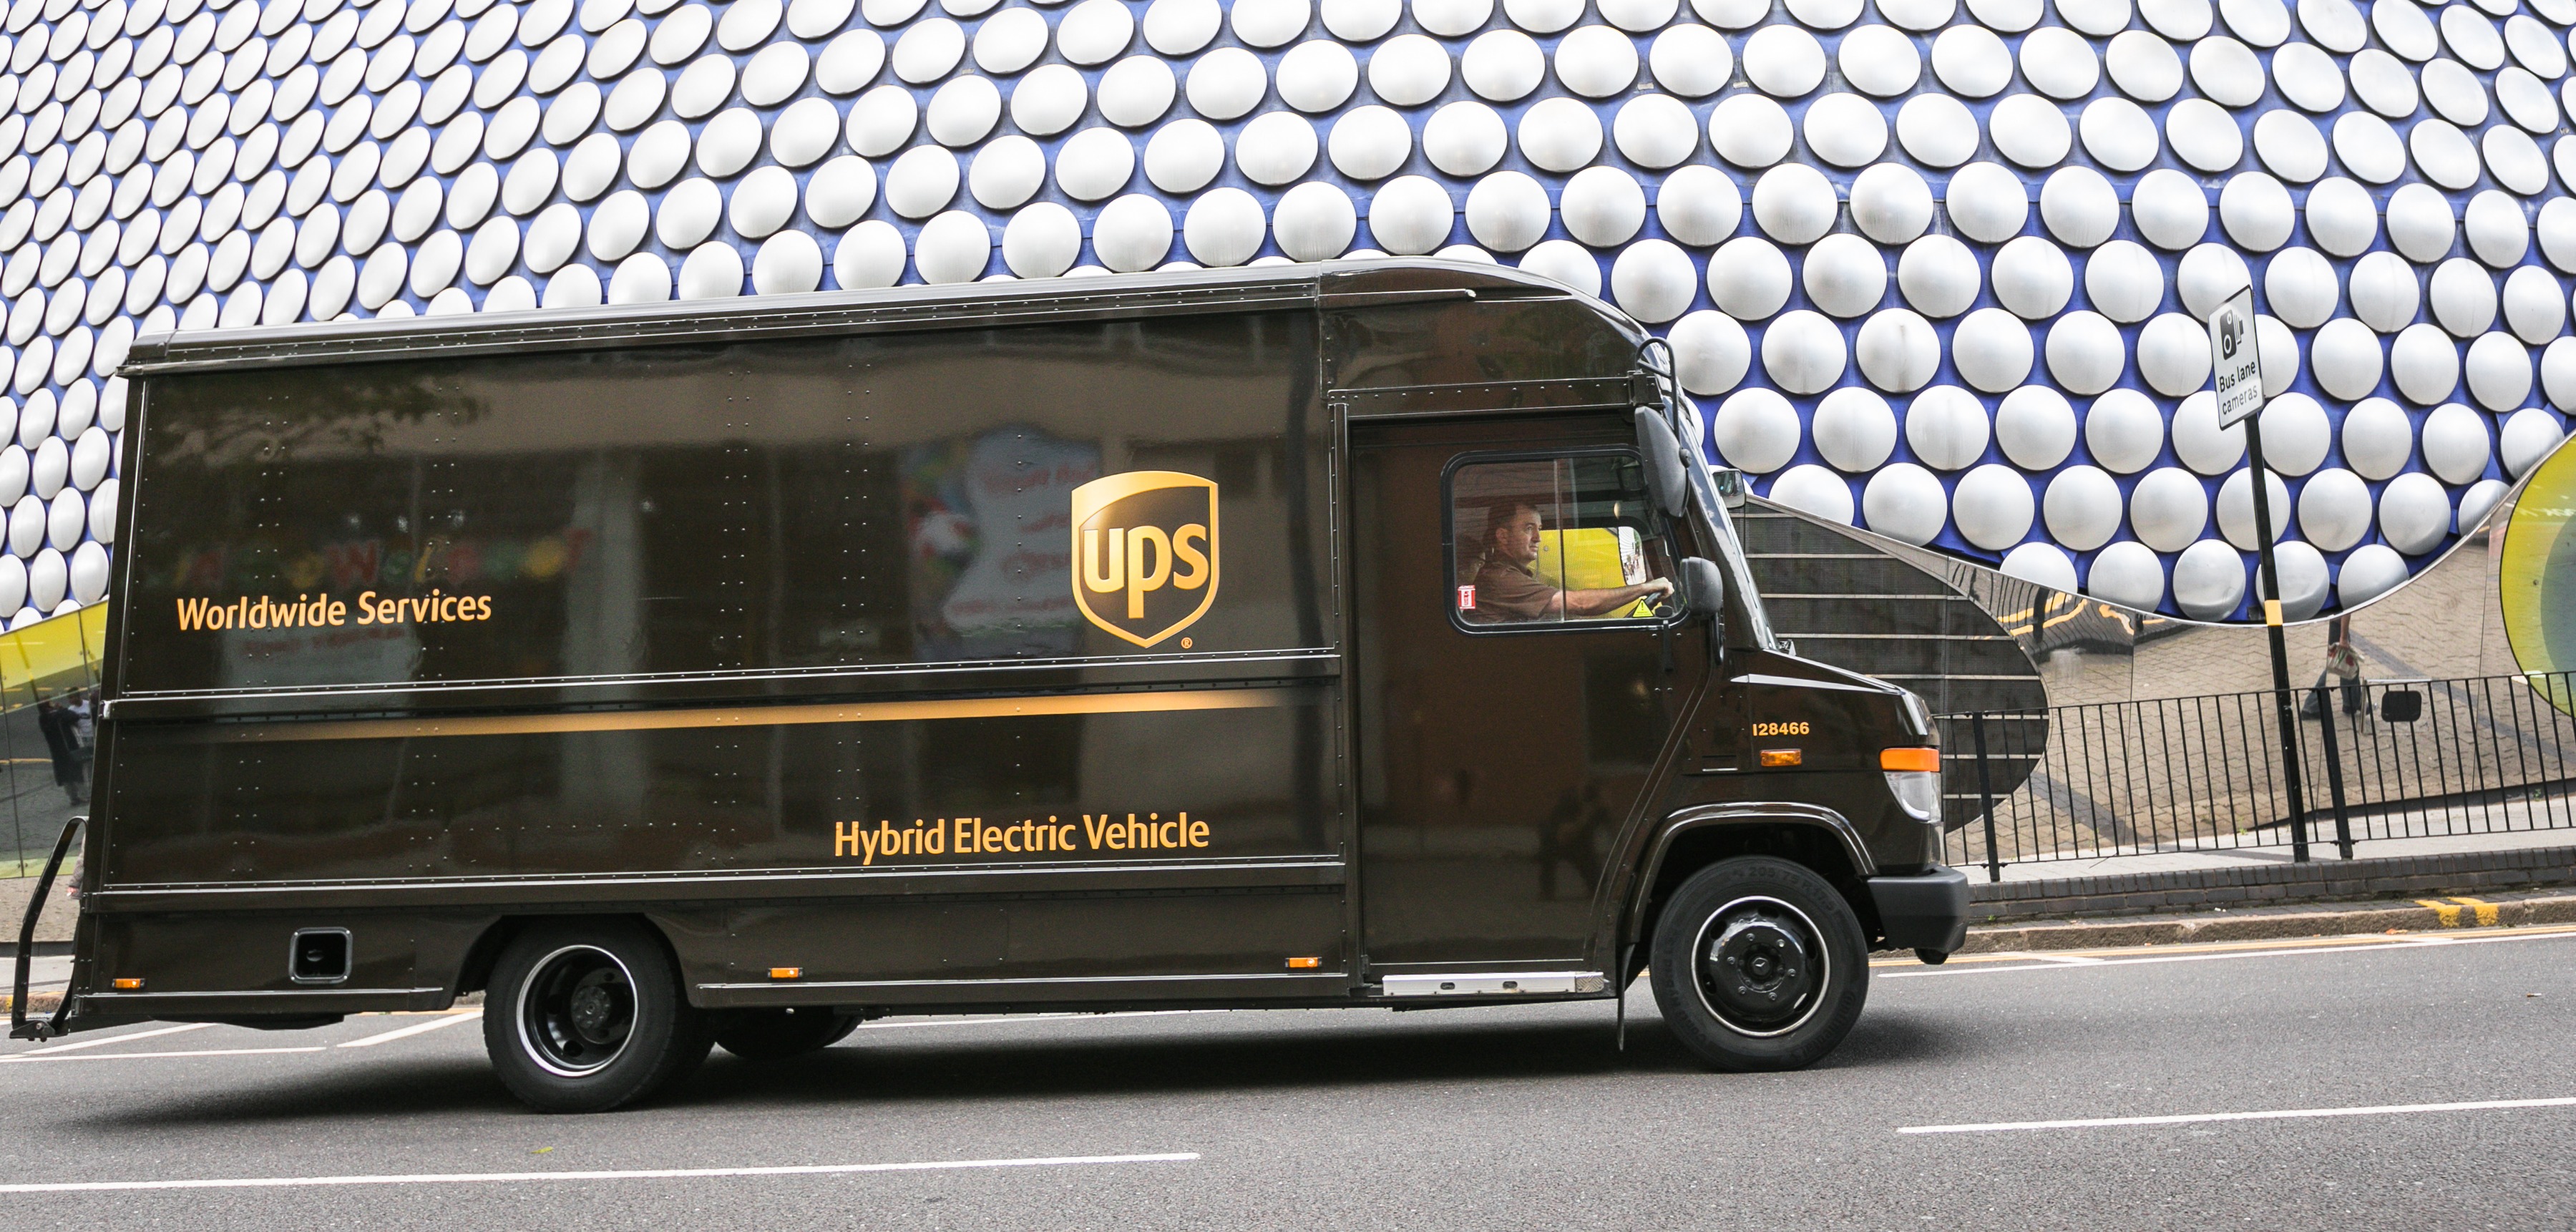 ups-introduces-groundbreaking-hybrid-electric-delivery-trucks